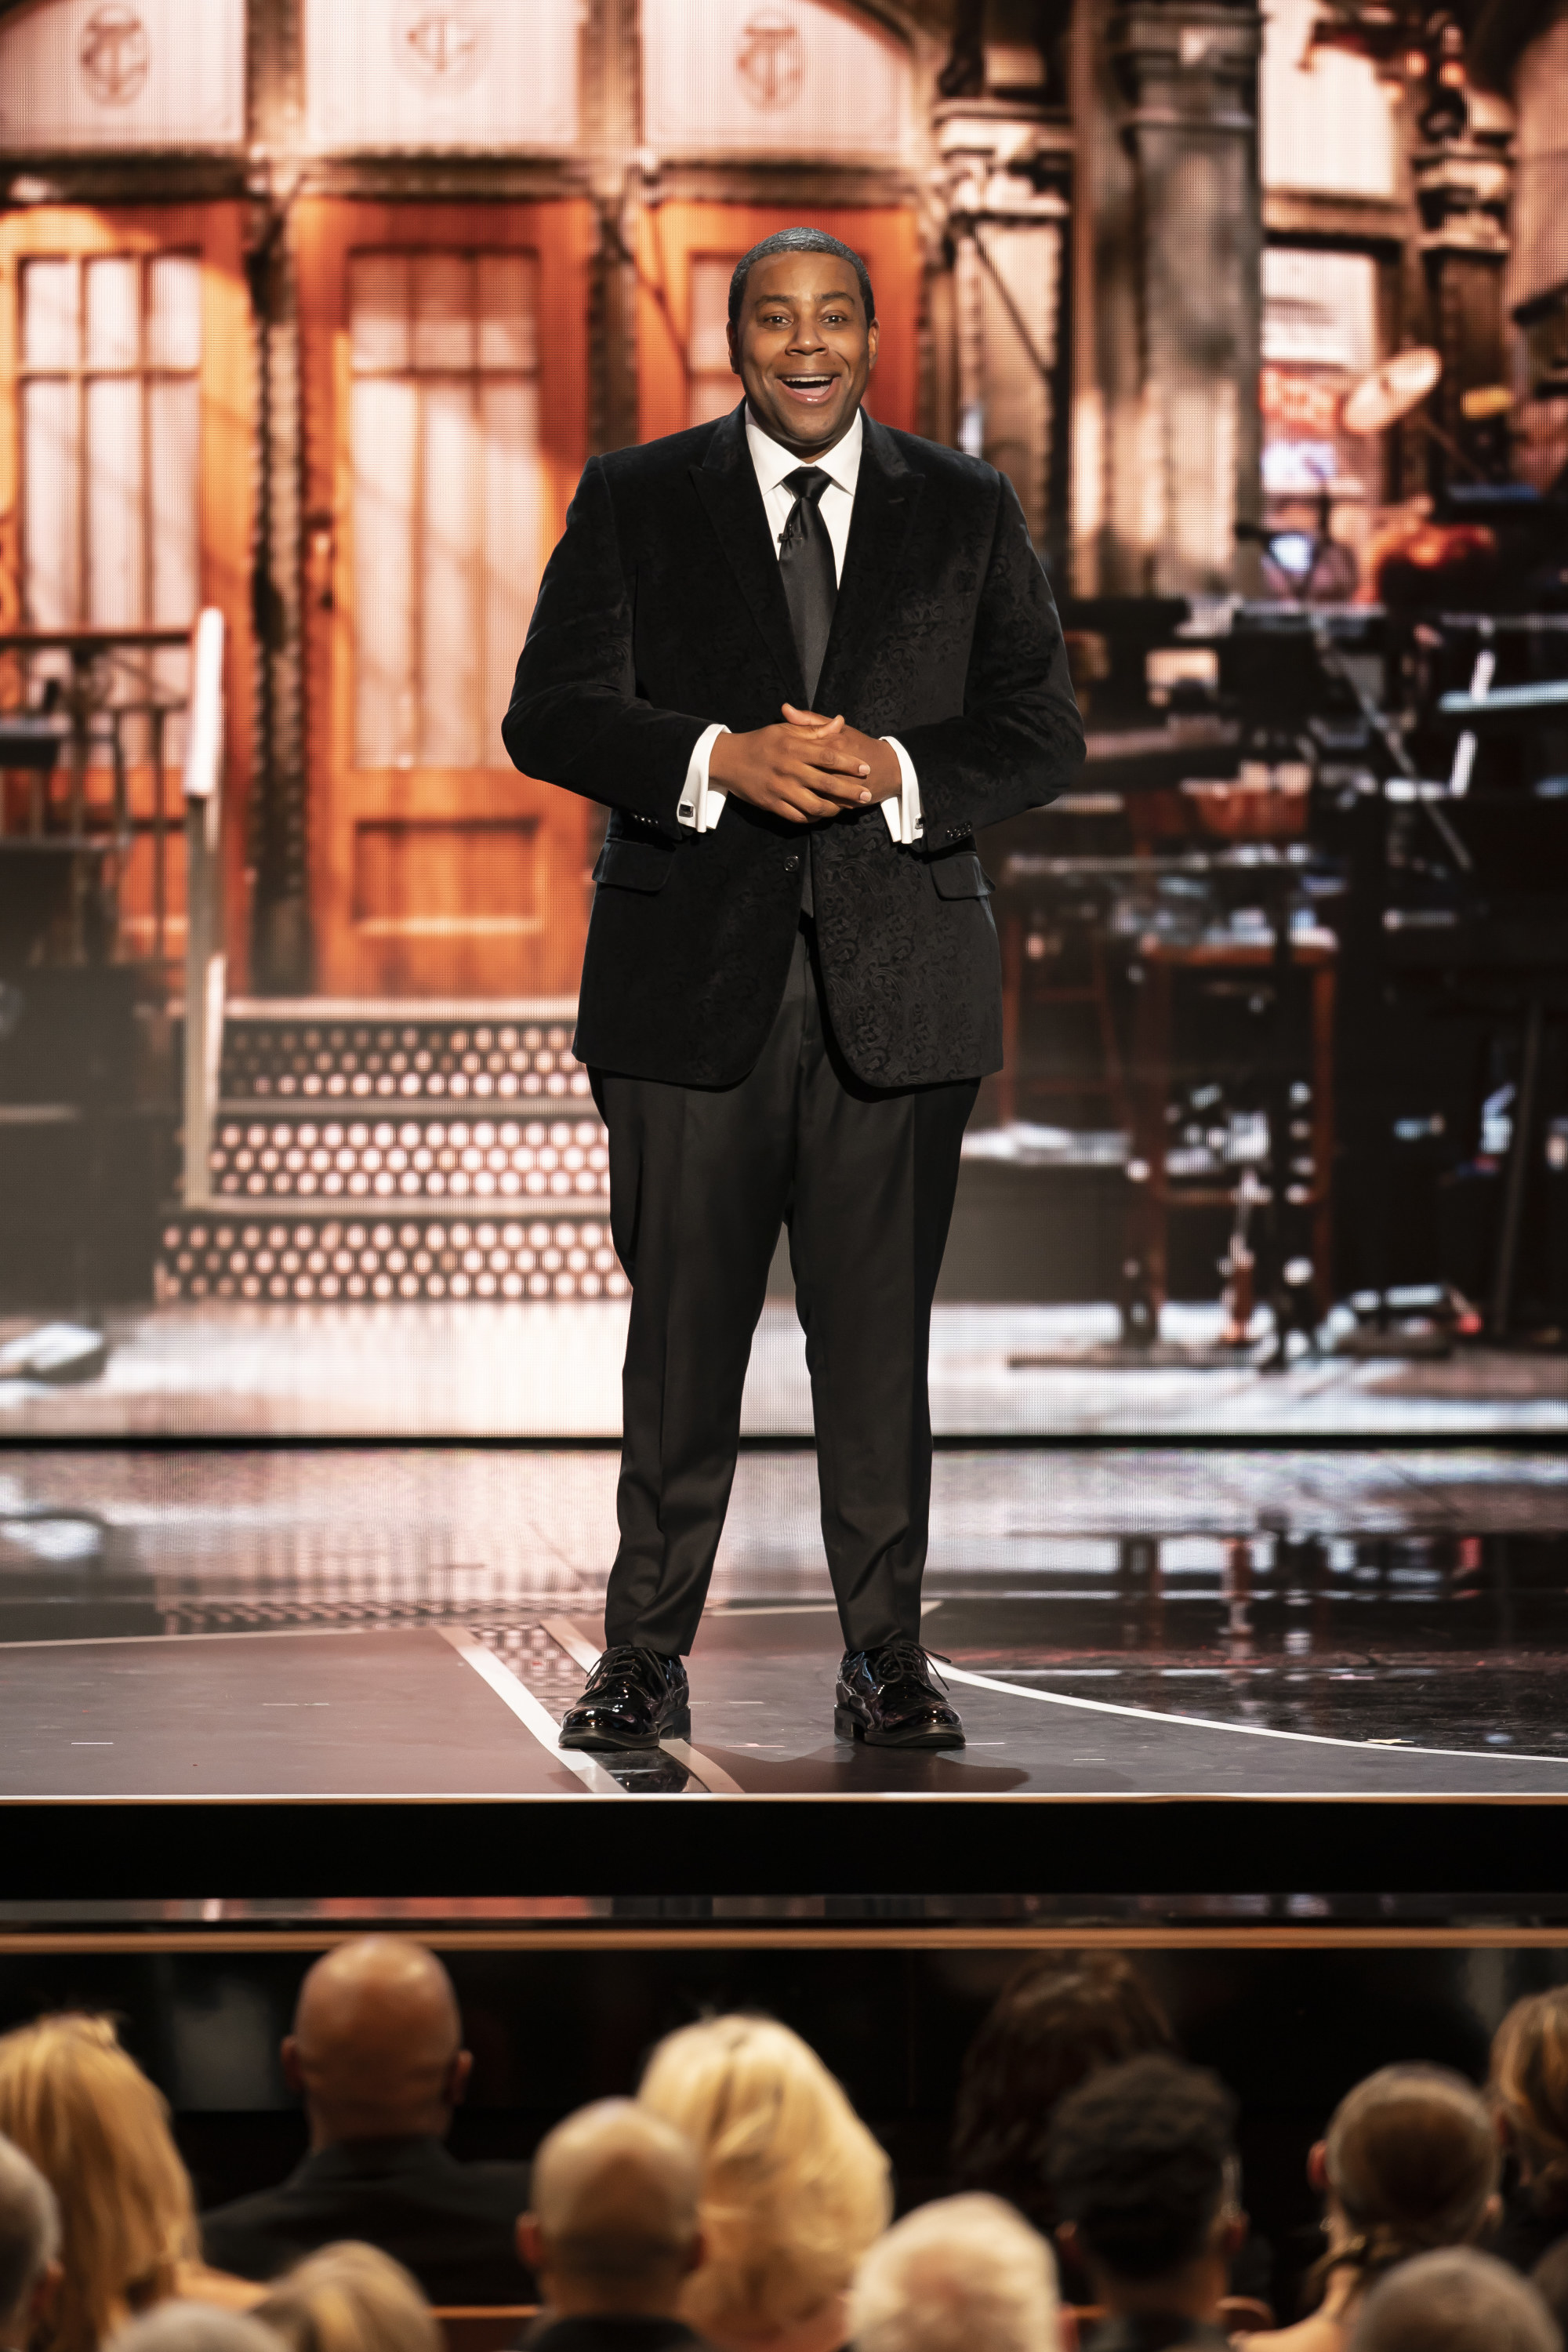 Kenan Thompson standing on stage at Kennedy Center Honors